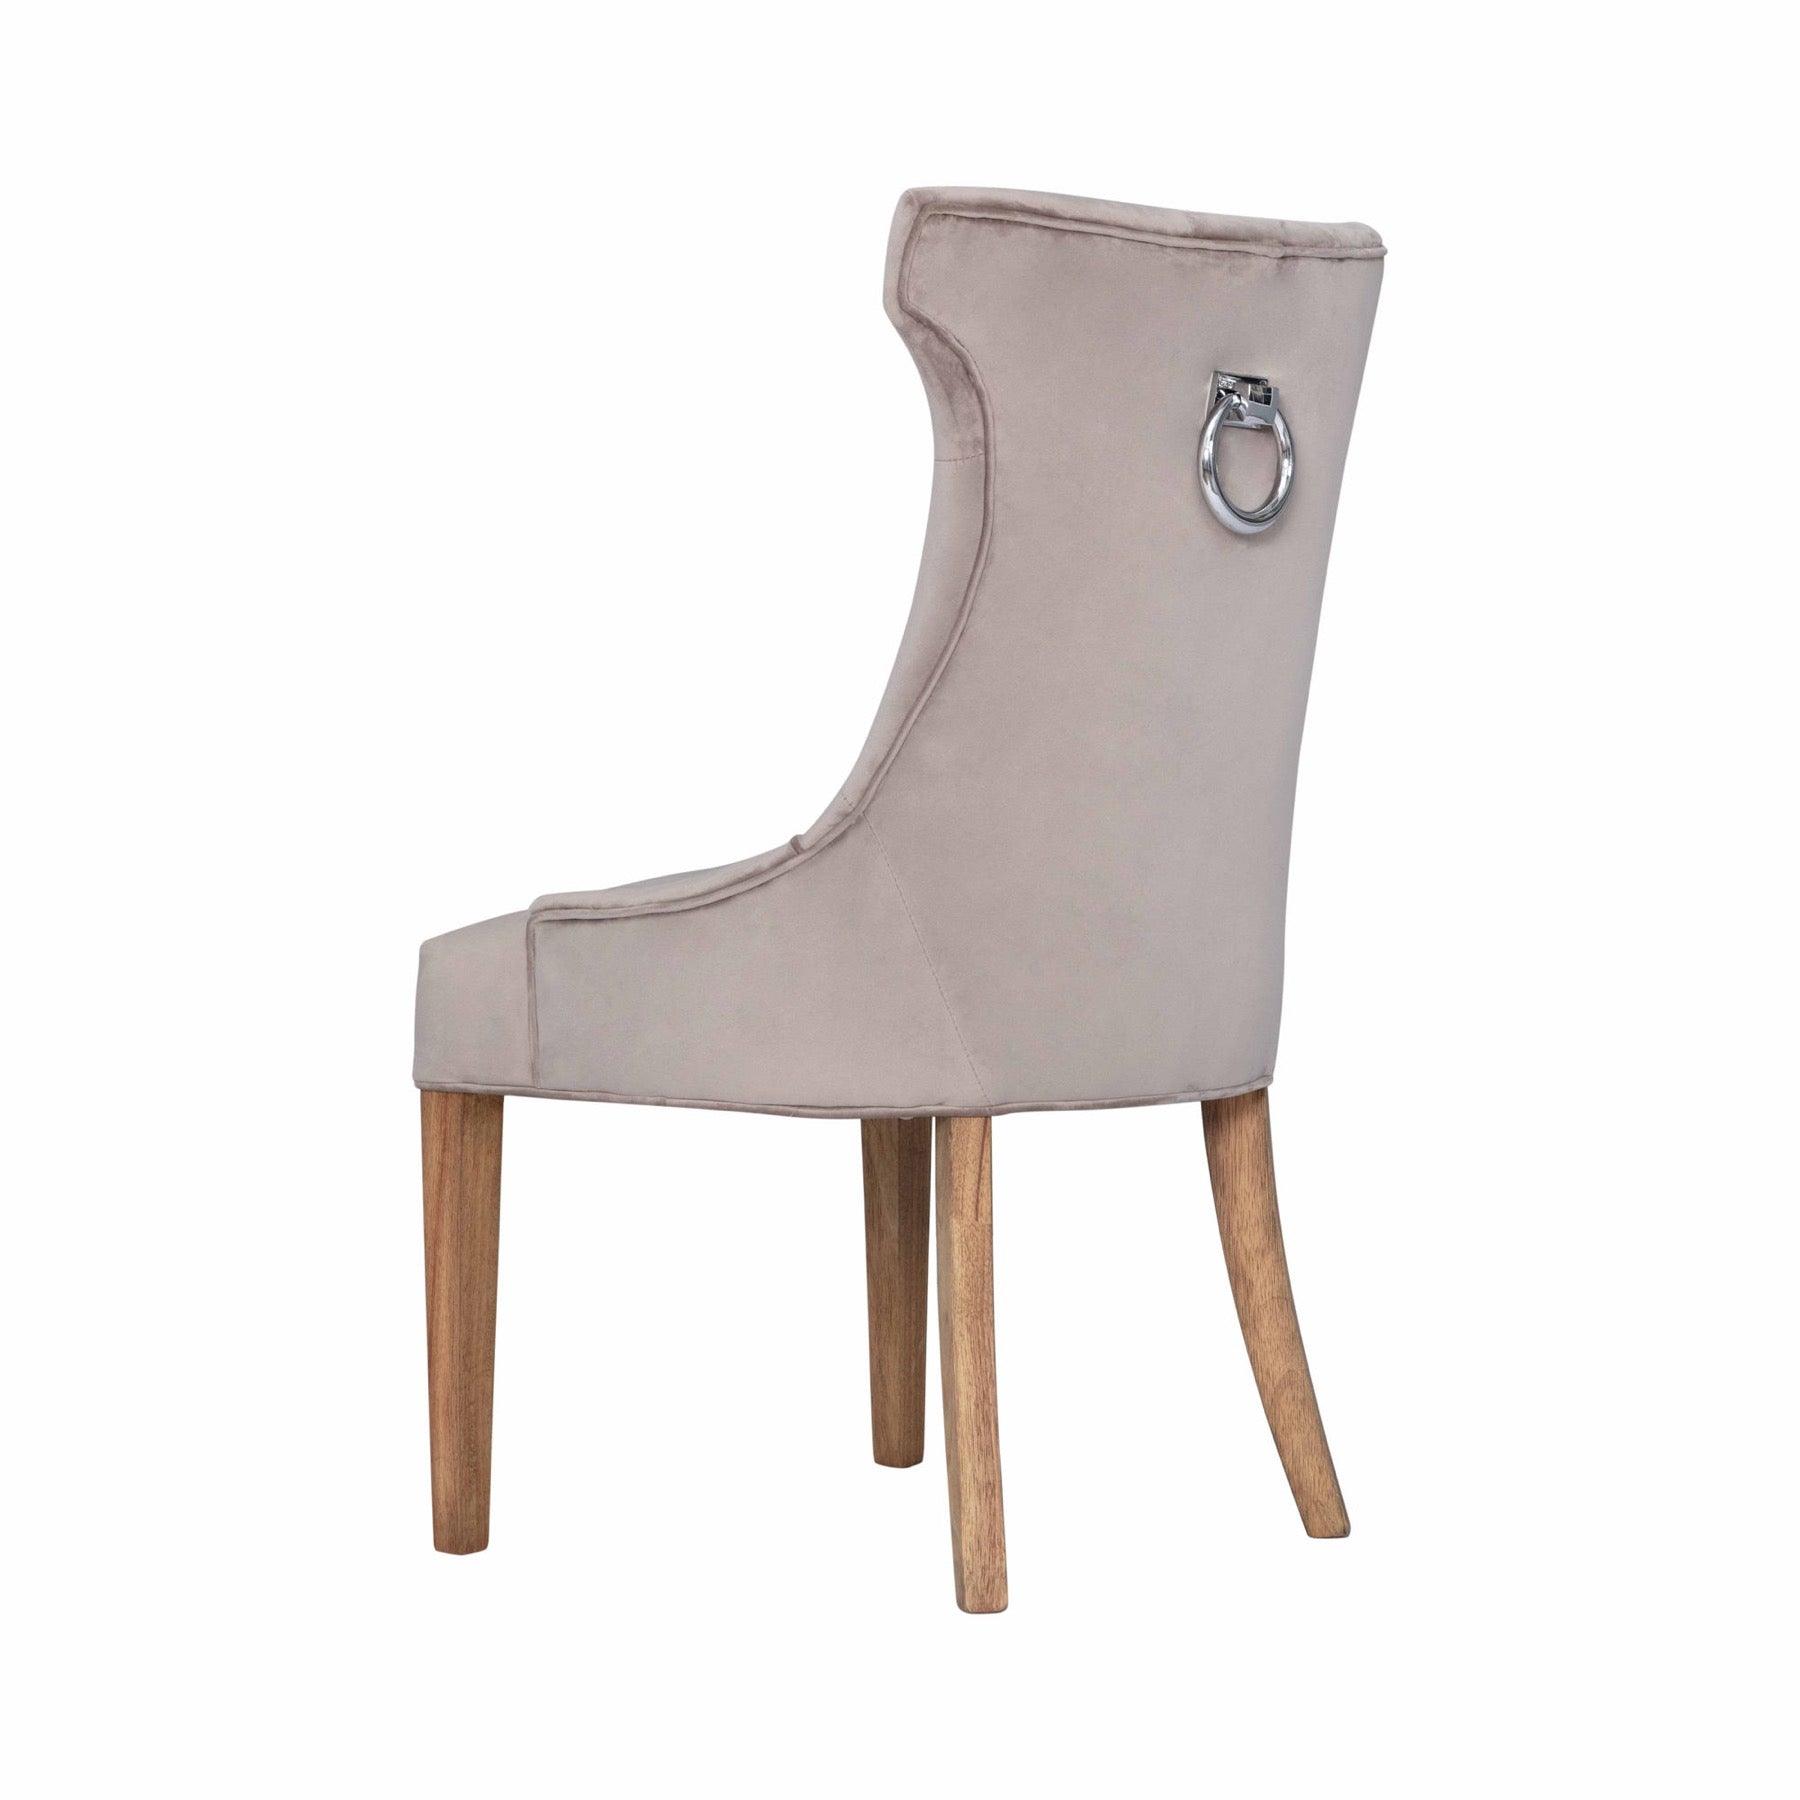 Chelsea High Wing Ring Backed Dining Chair - Vookoo Lifestyle